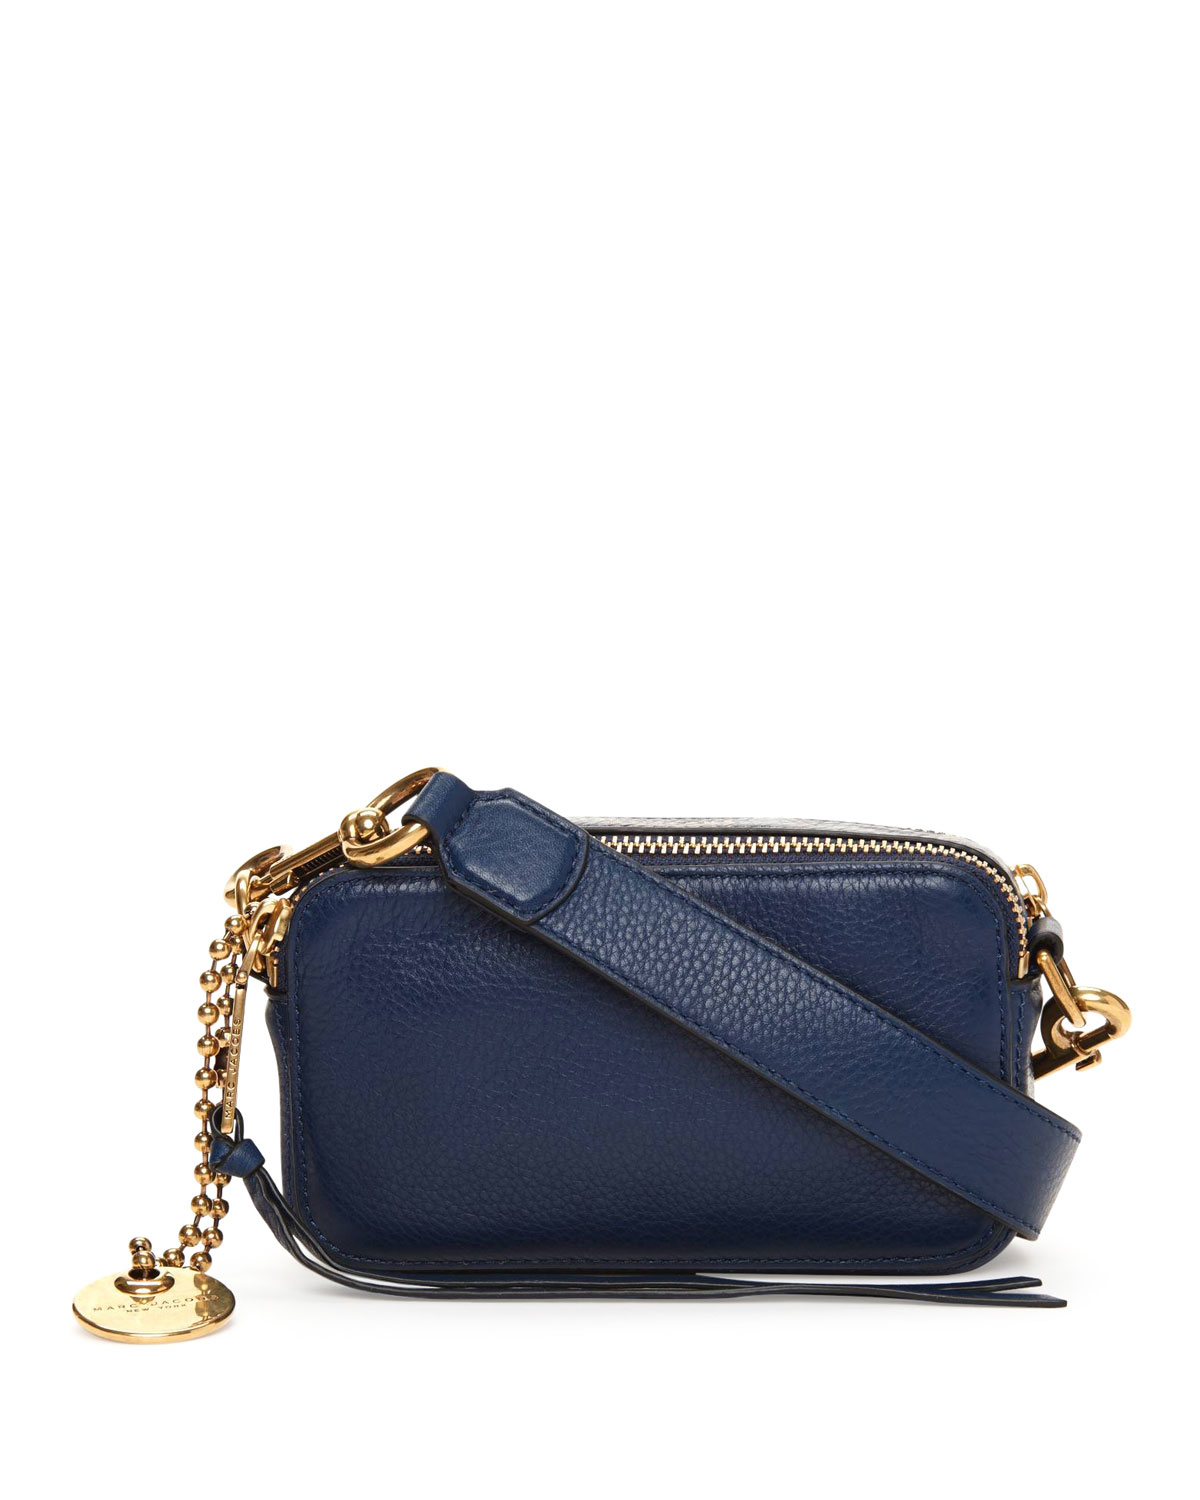 Lyst - Marc Jacobs Recruit Leather Camera Bag in Blue